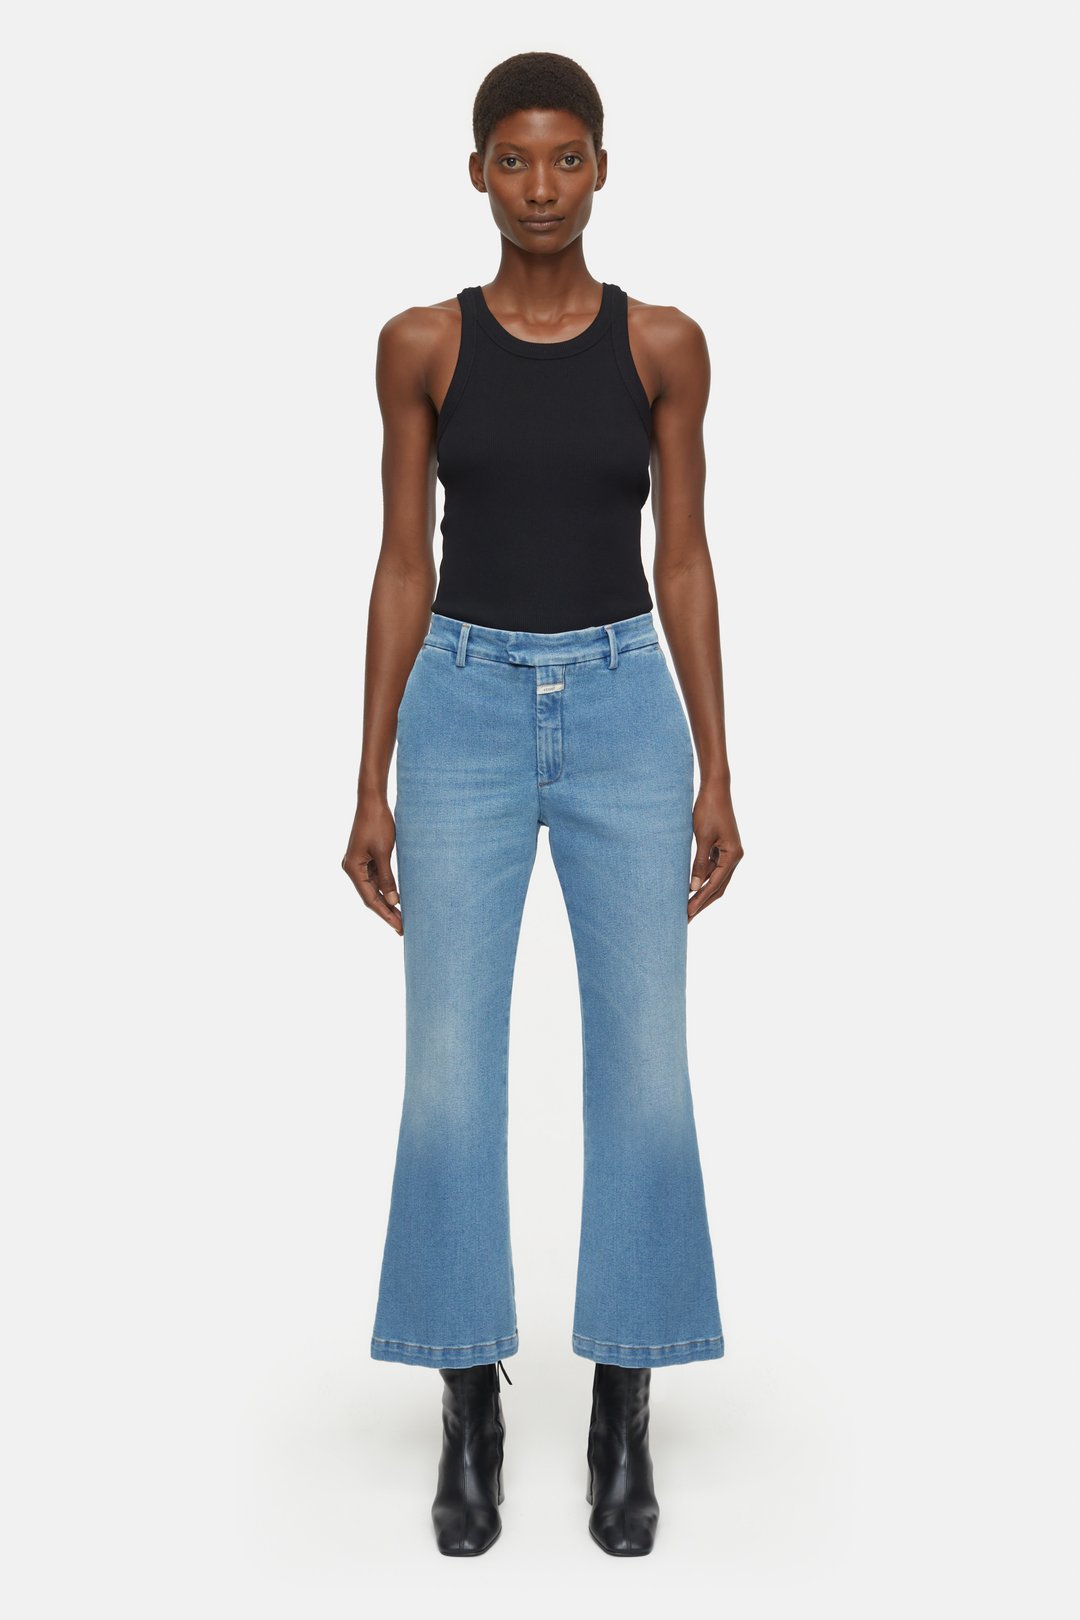 NAME CLOSED RELAXED - | STYLE JEANS WHARTON